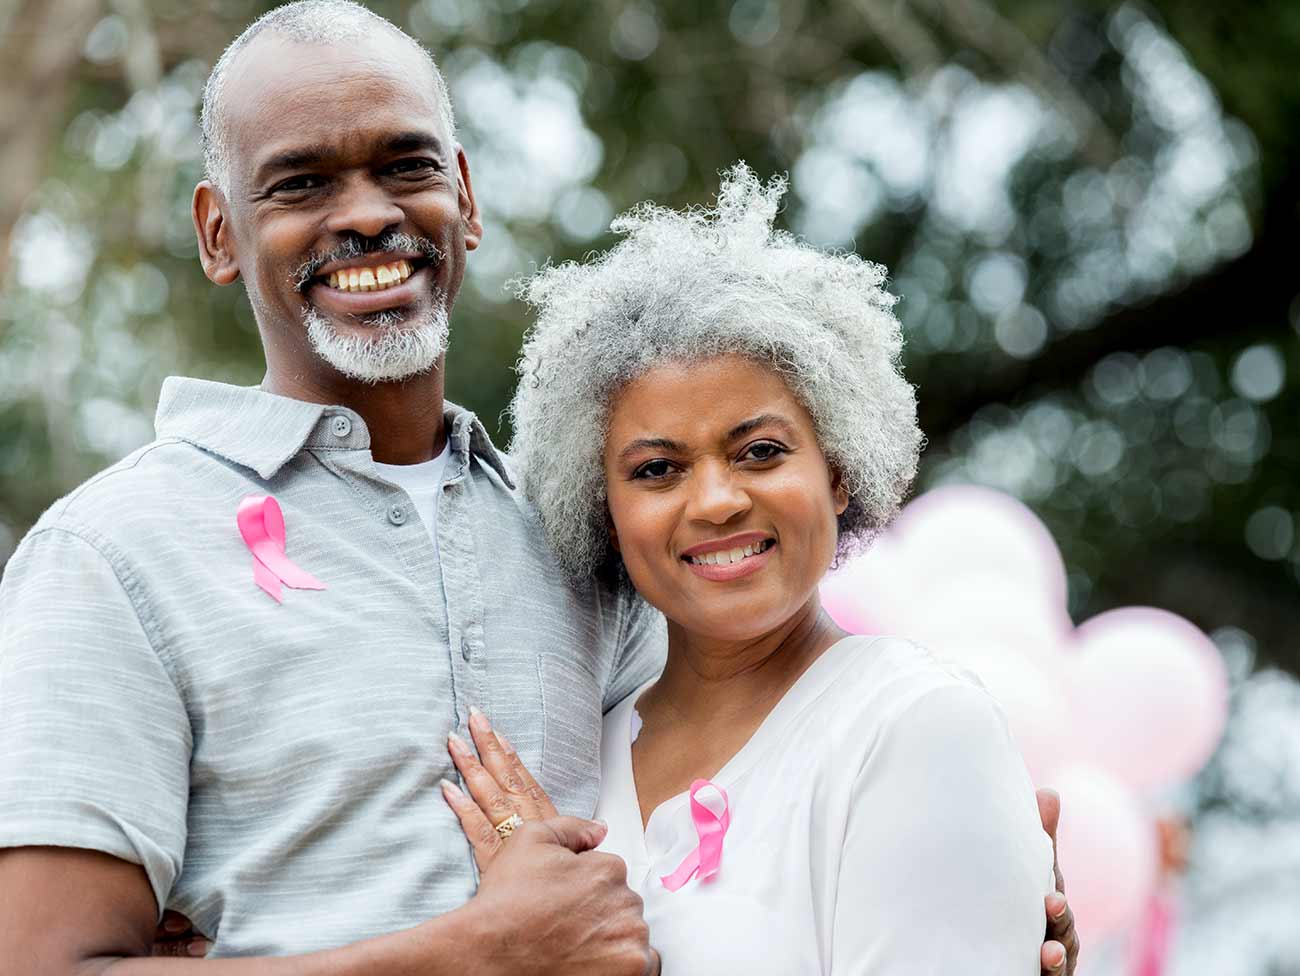 Smiling senior man and woman, both are wearing pink breast cancer awareness ribbons. 